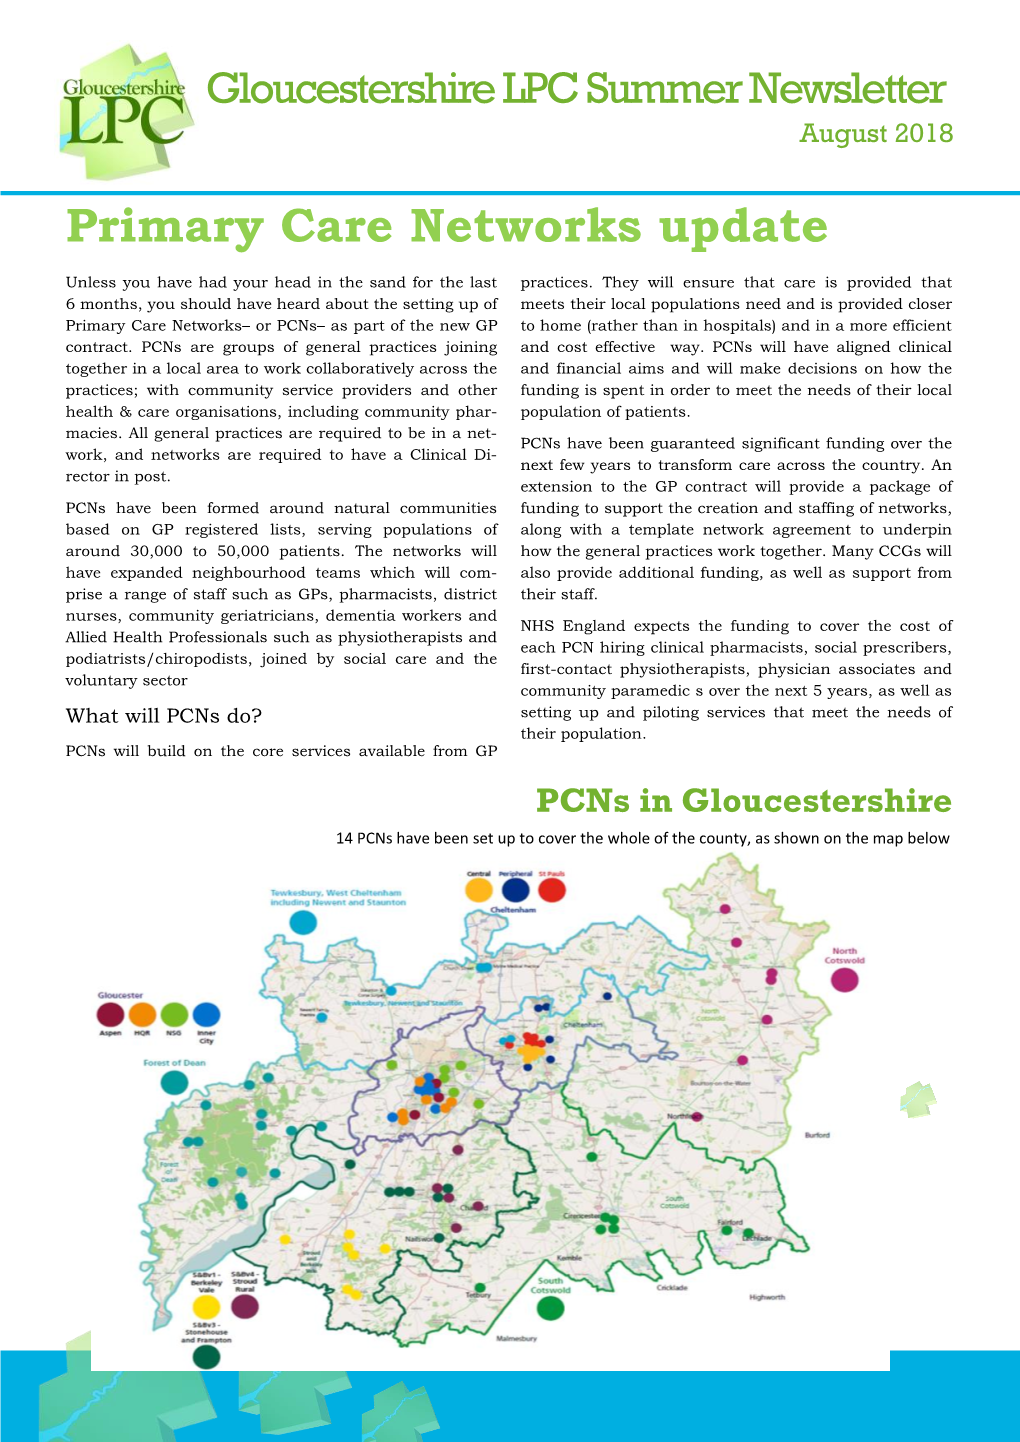 Primary Care Networks Update